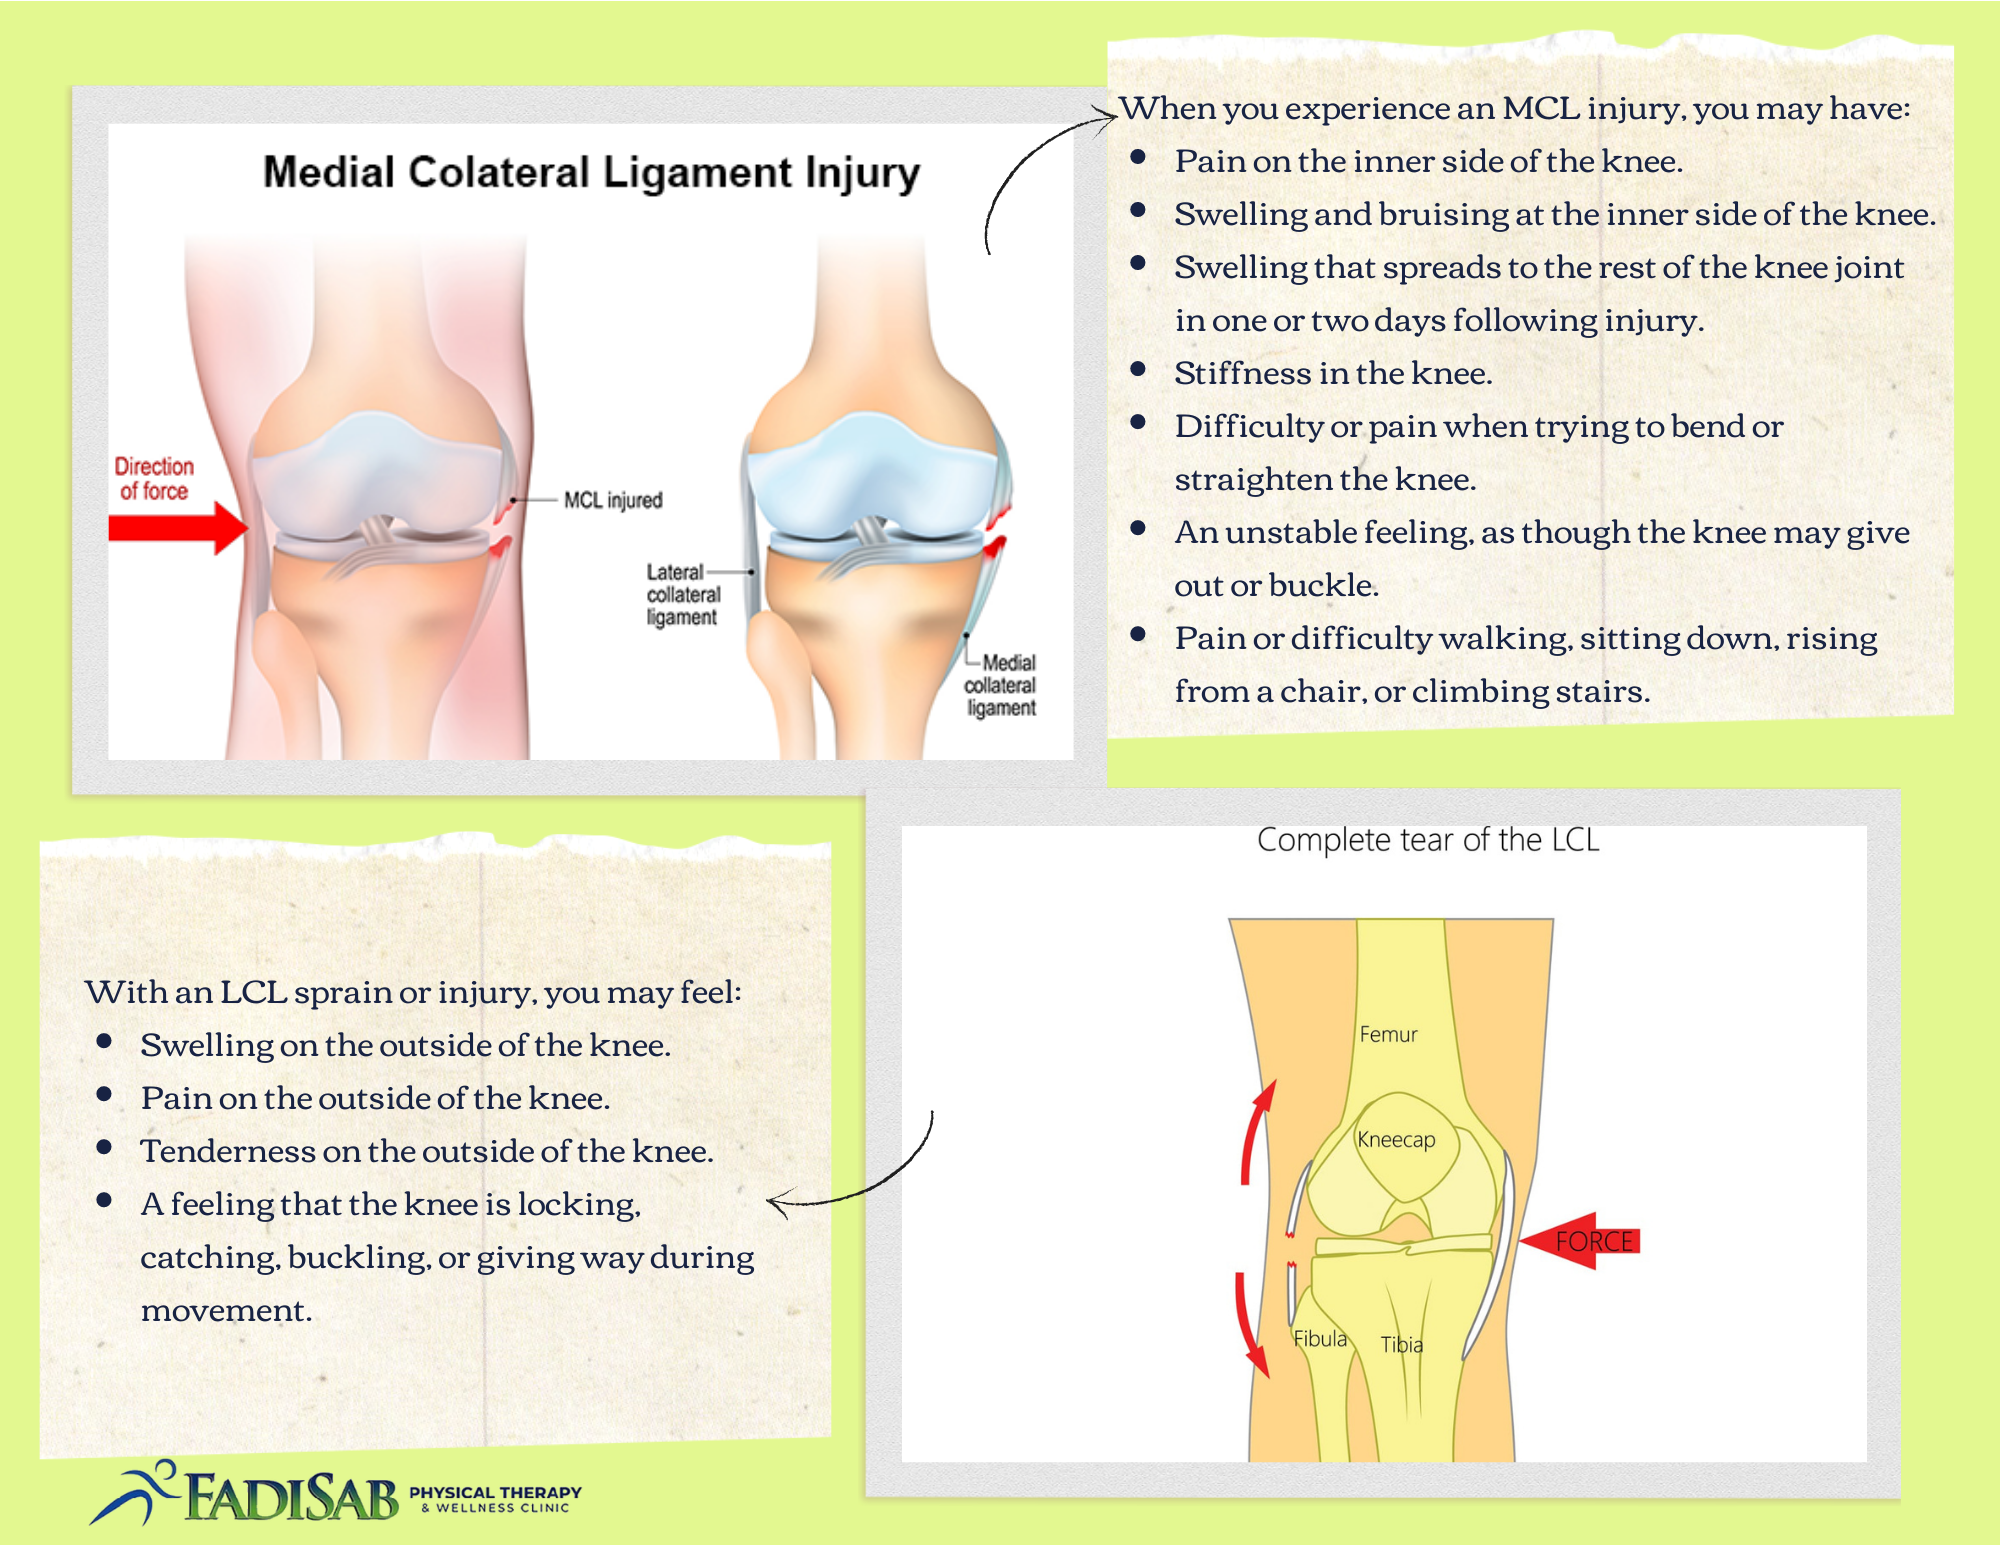 Collateral Ligamant Injuries and how they are treated at SSC